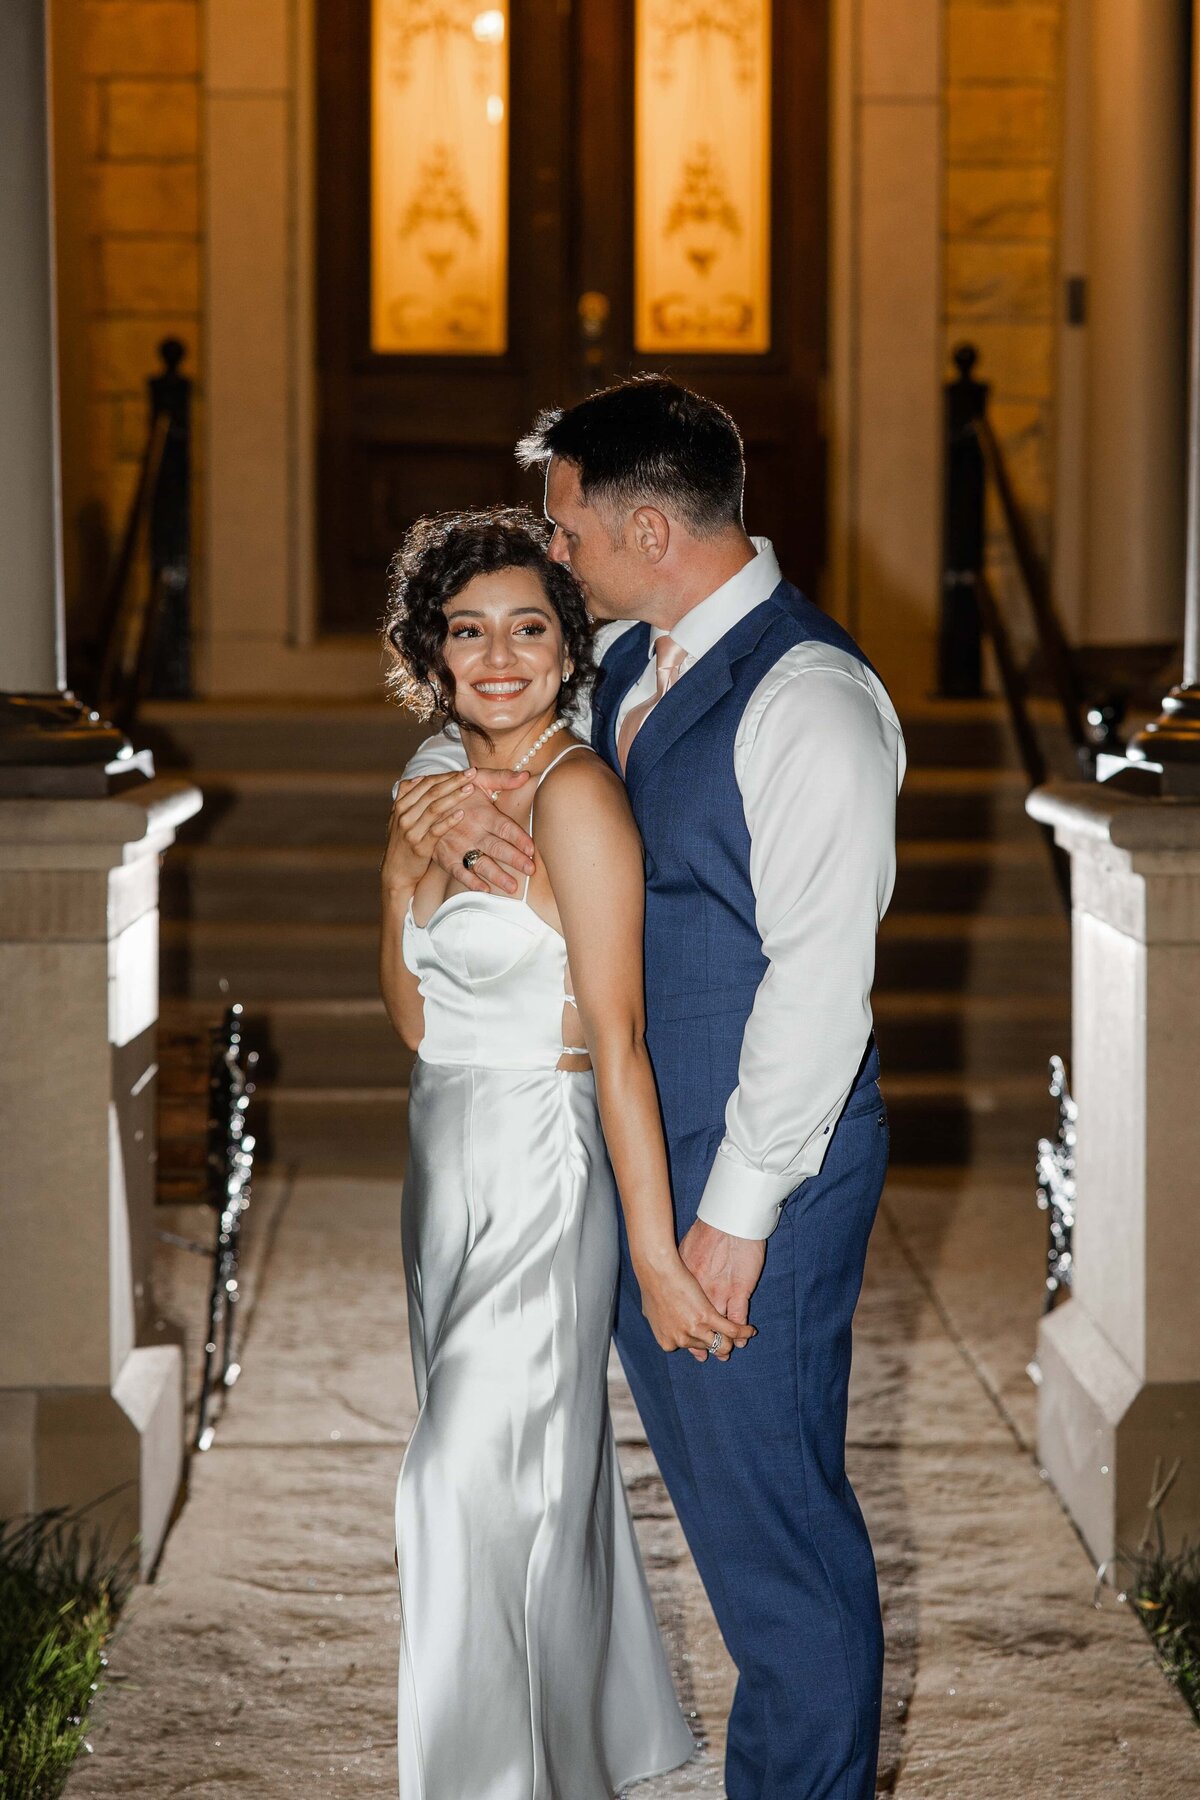 A bride in a white satin dress and a groom in a blue suit embrace lovingly outside a grand building at night during their park farm winery wedding.